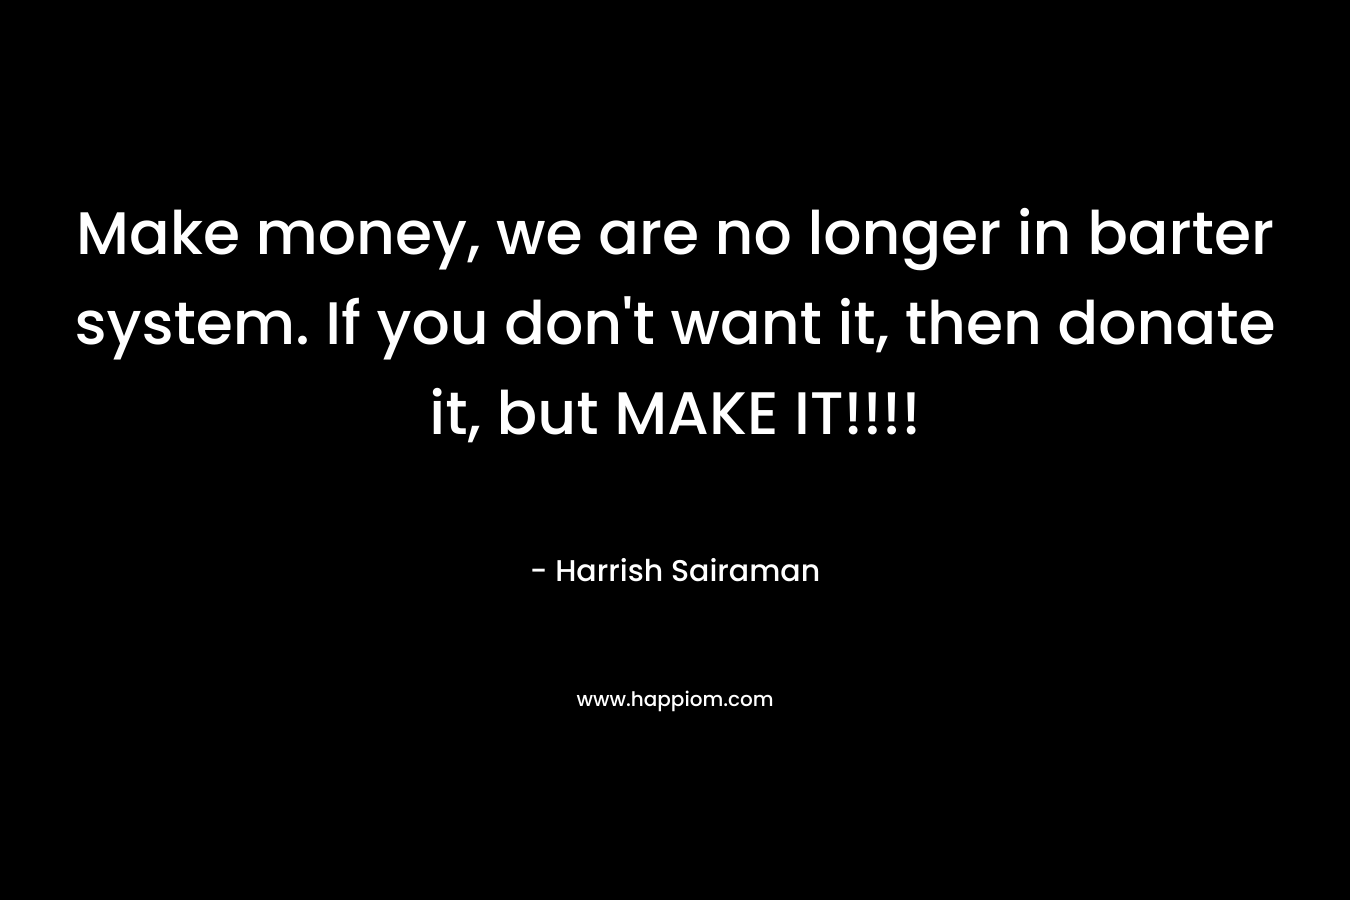 Make money, we are no longer in barter system. If you don't want it, then donate it, but MAKE IT!!!!